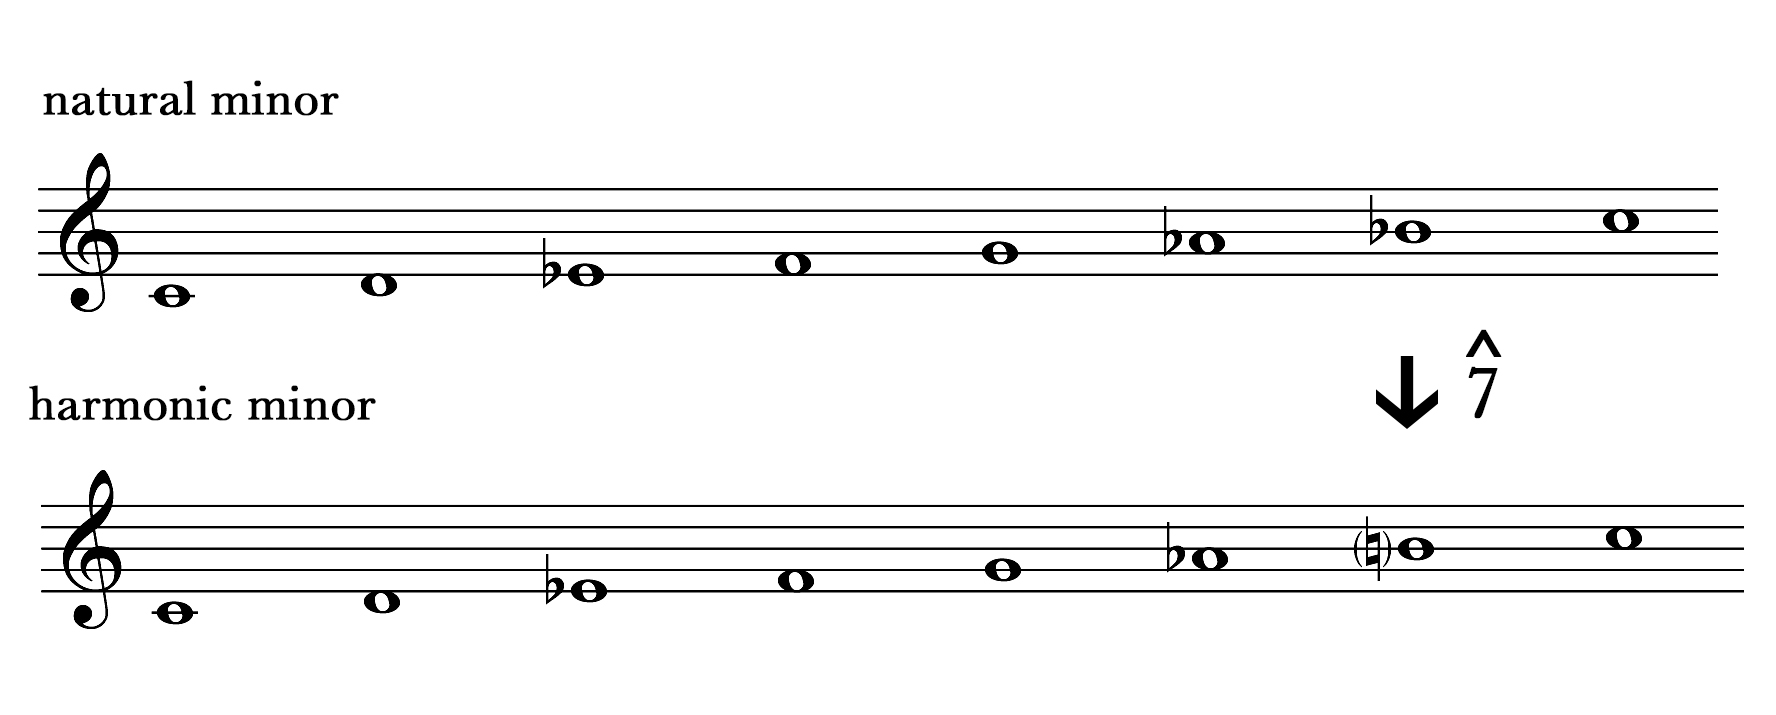 A C natural minor and C harmonic minor scale compared.